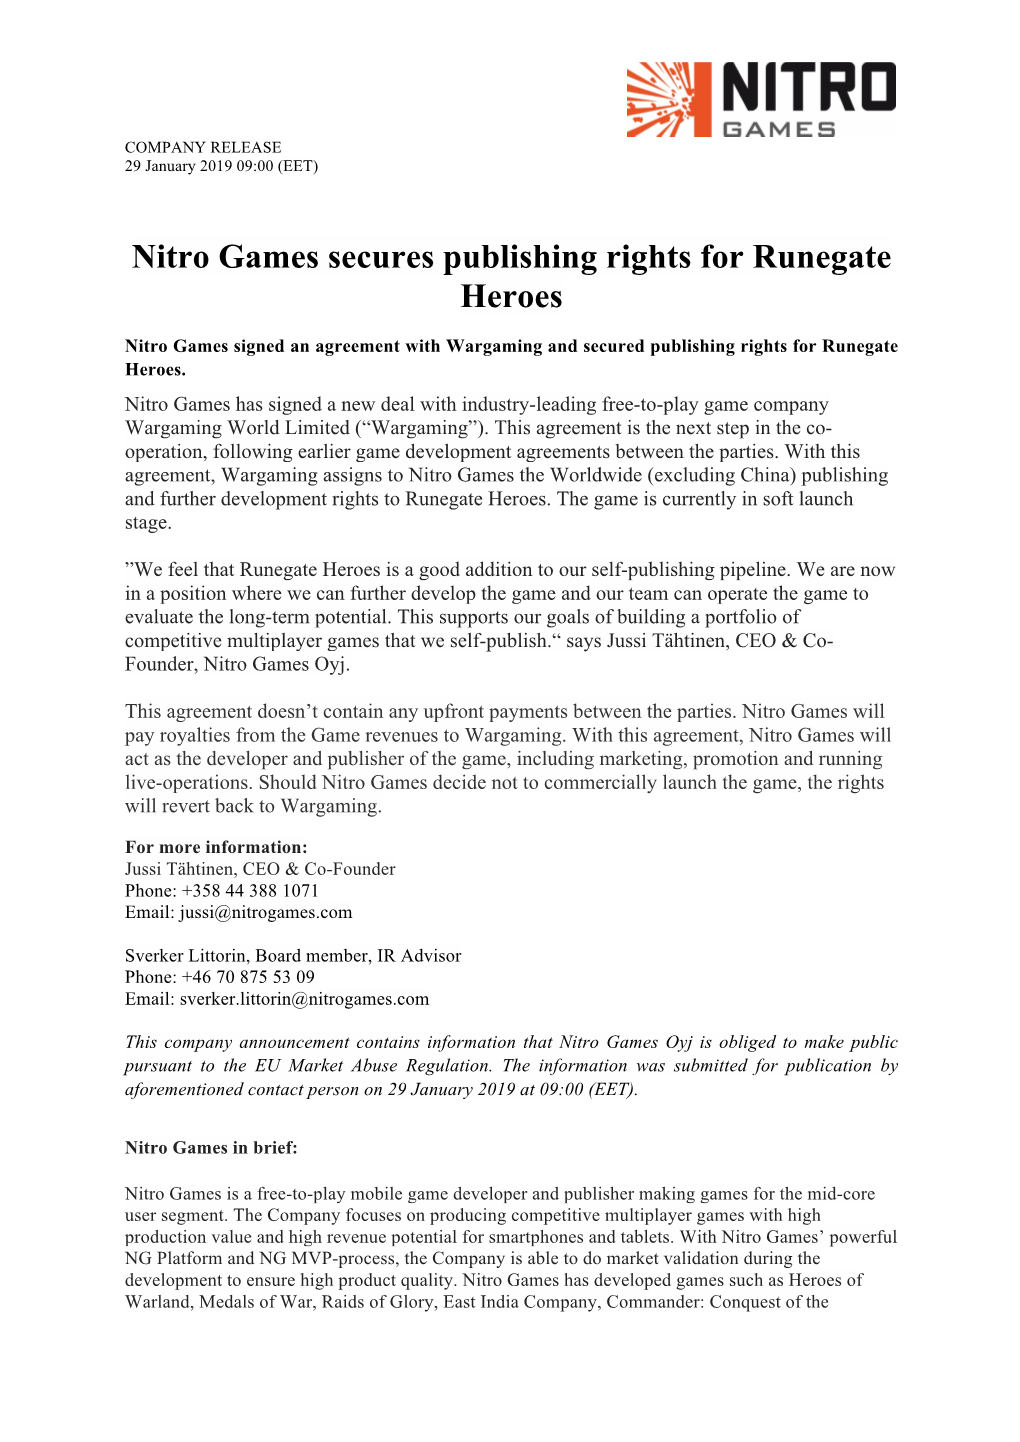 Nitro Games Secures Publishing Rights for Runegate Heroes